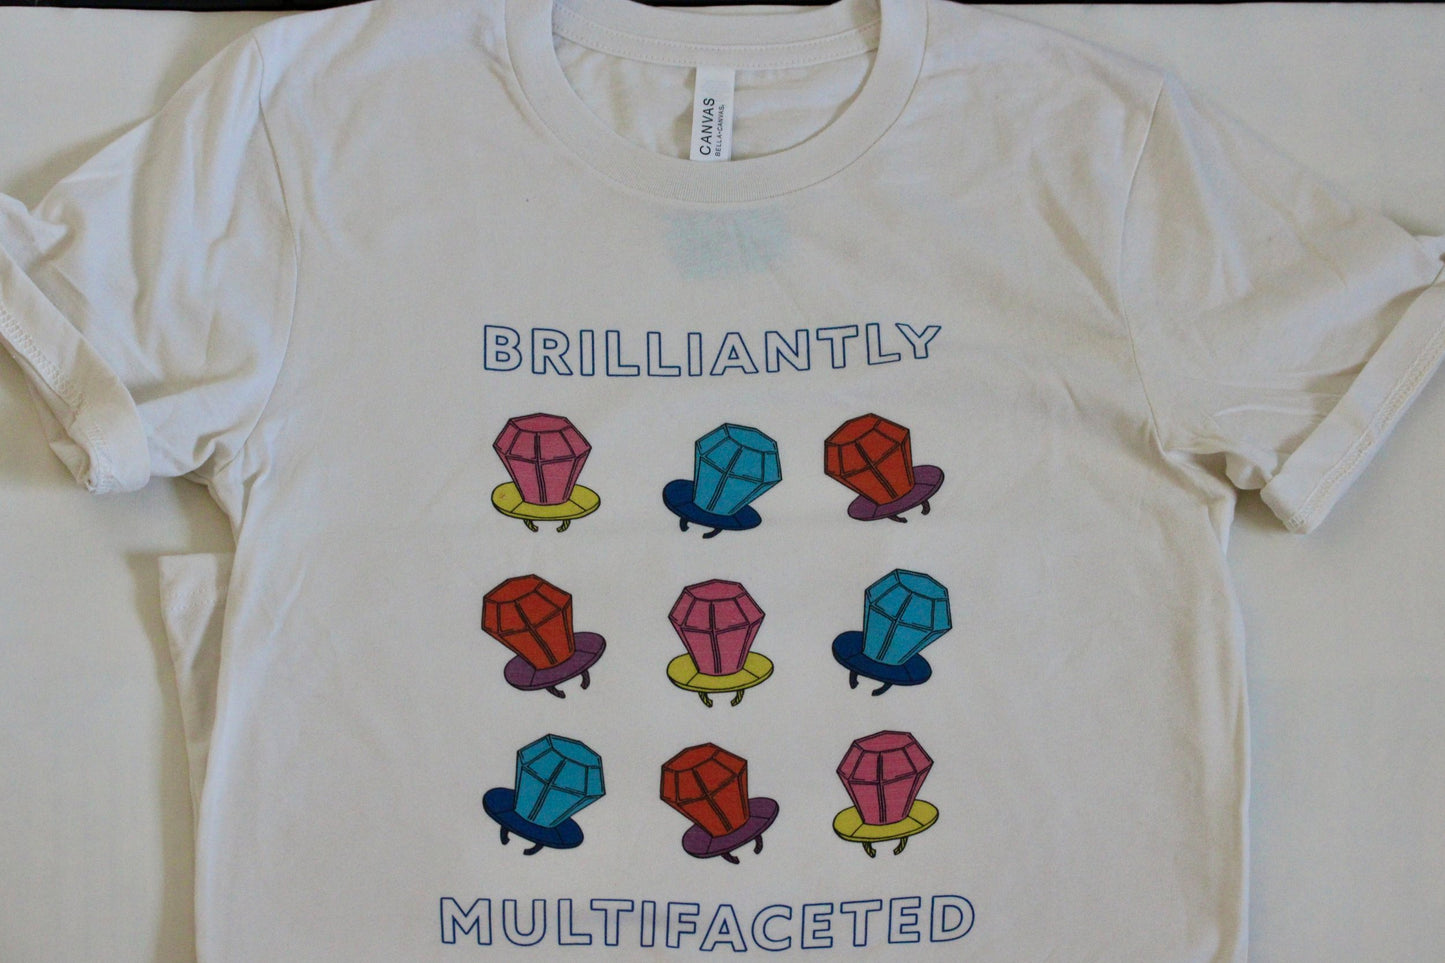 Cute t-shirt with colorful design and the words "Brilliantly Multifaceted"